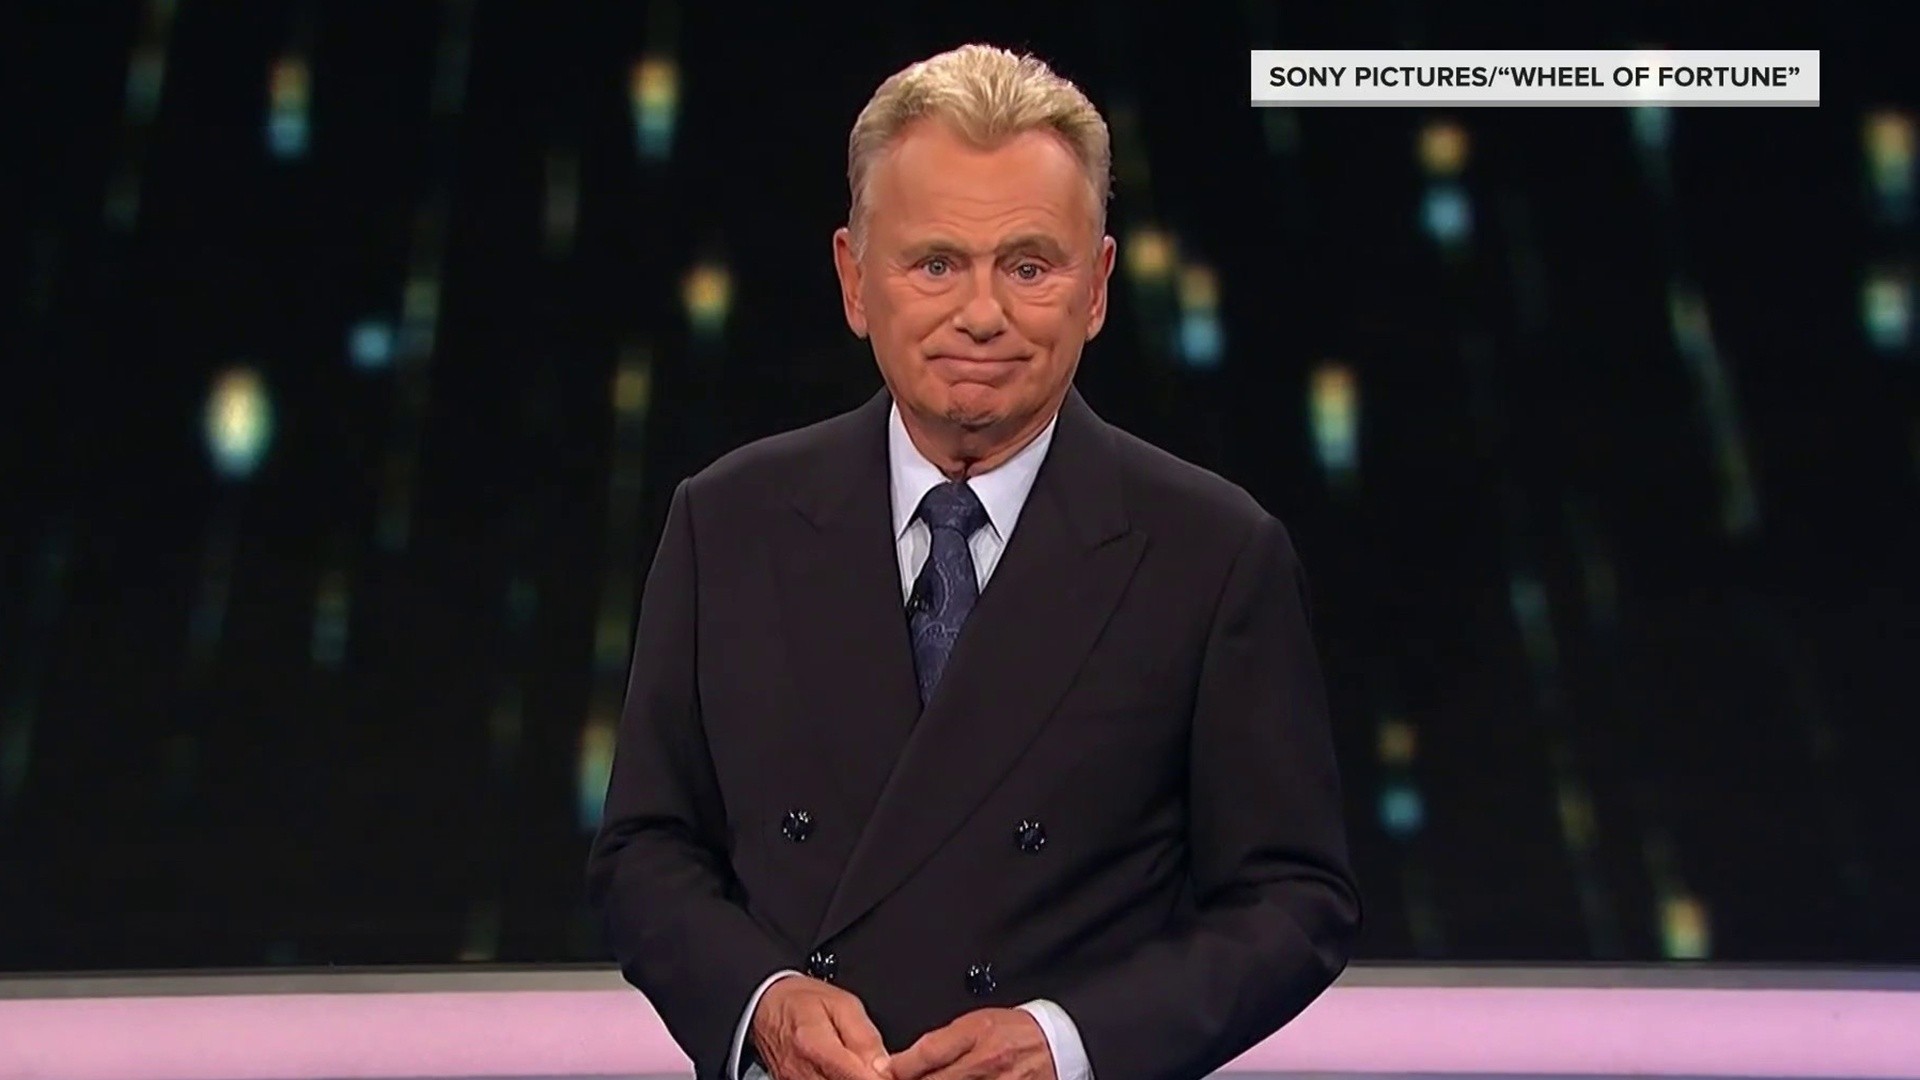 Pat Sajak signs off with sweet goodbye in final 'Wheel of Fortune'